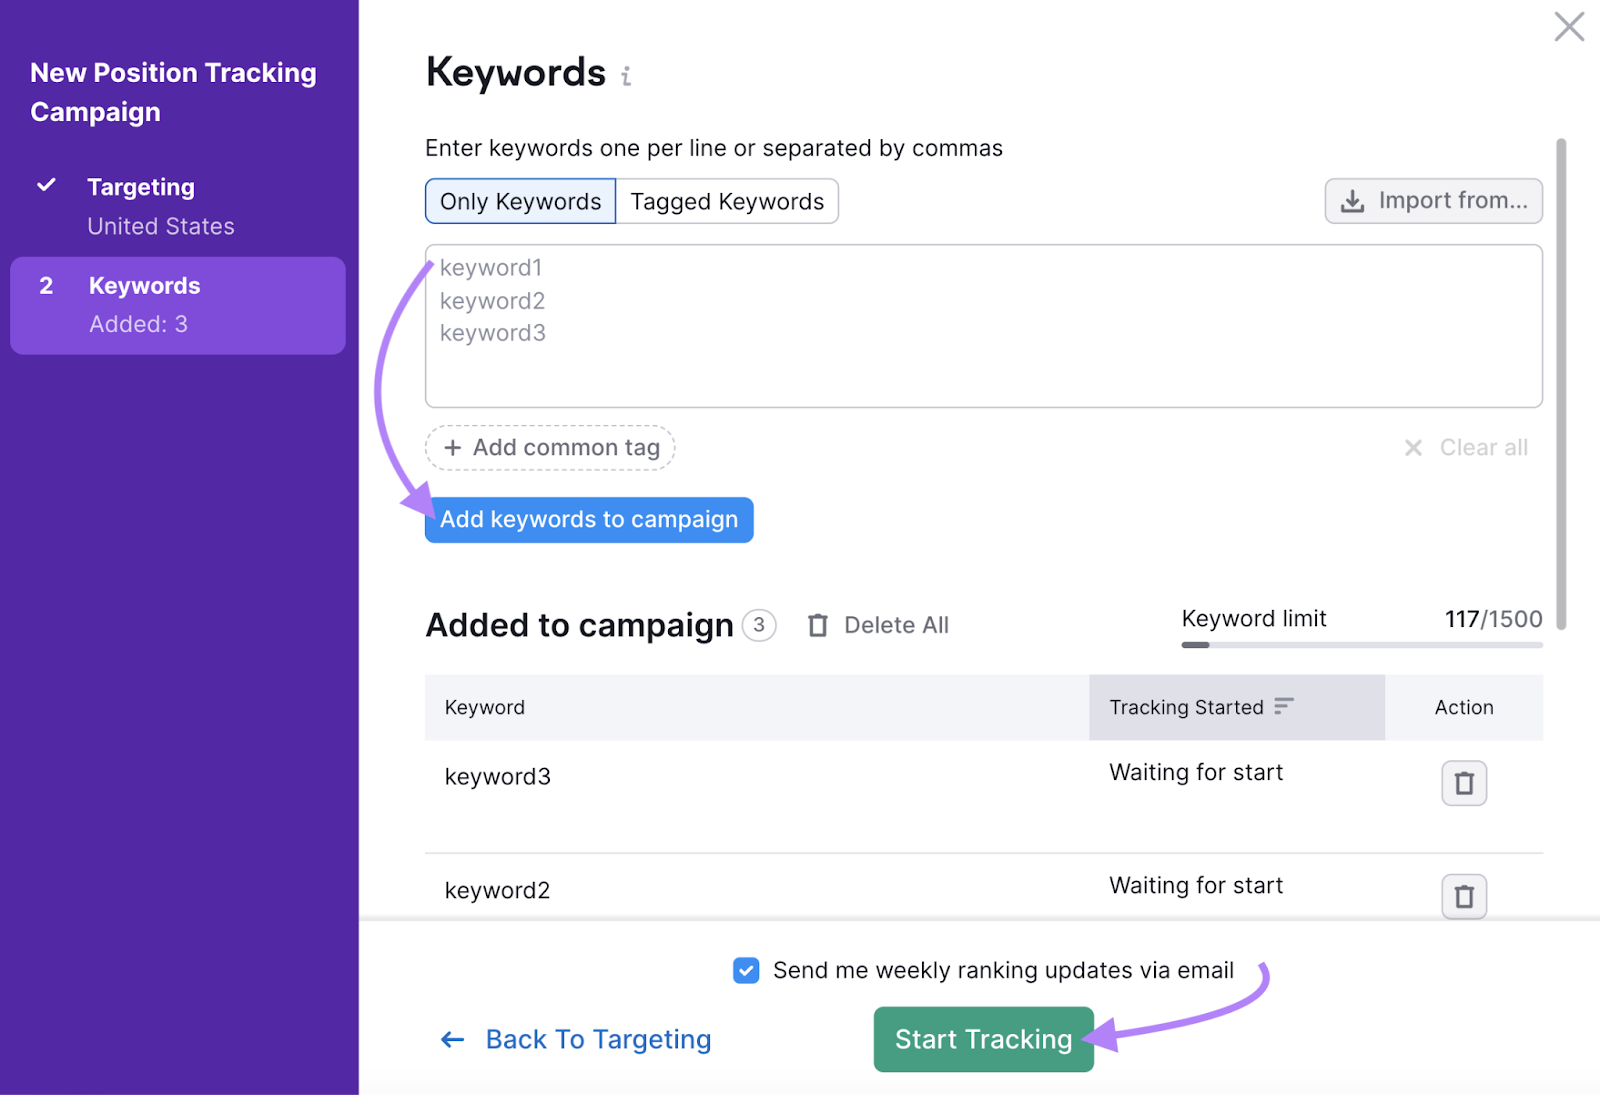 add keywords to campaign in position tracking tool settings